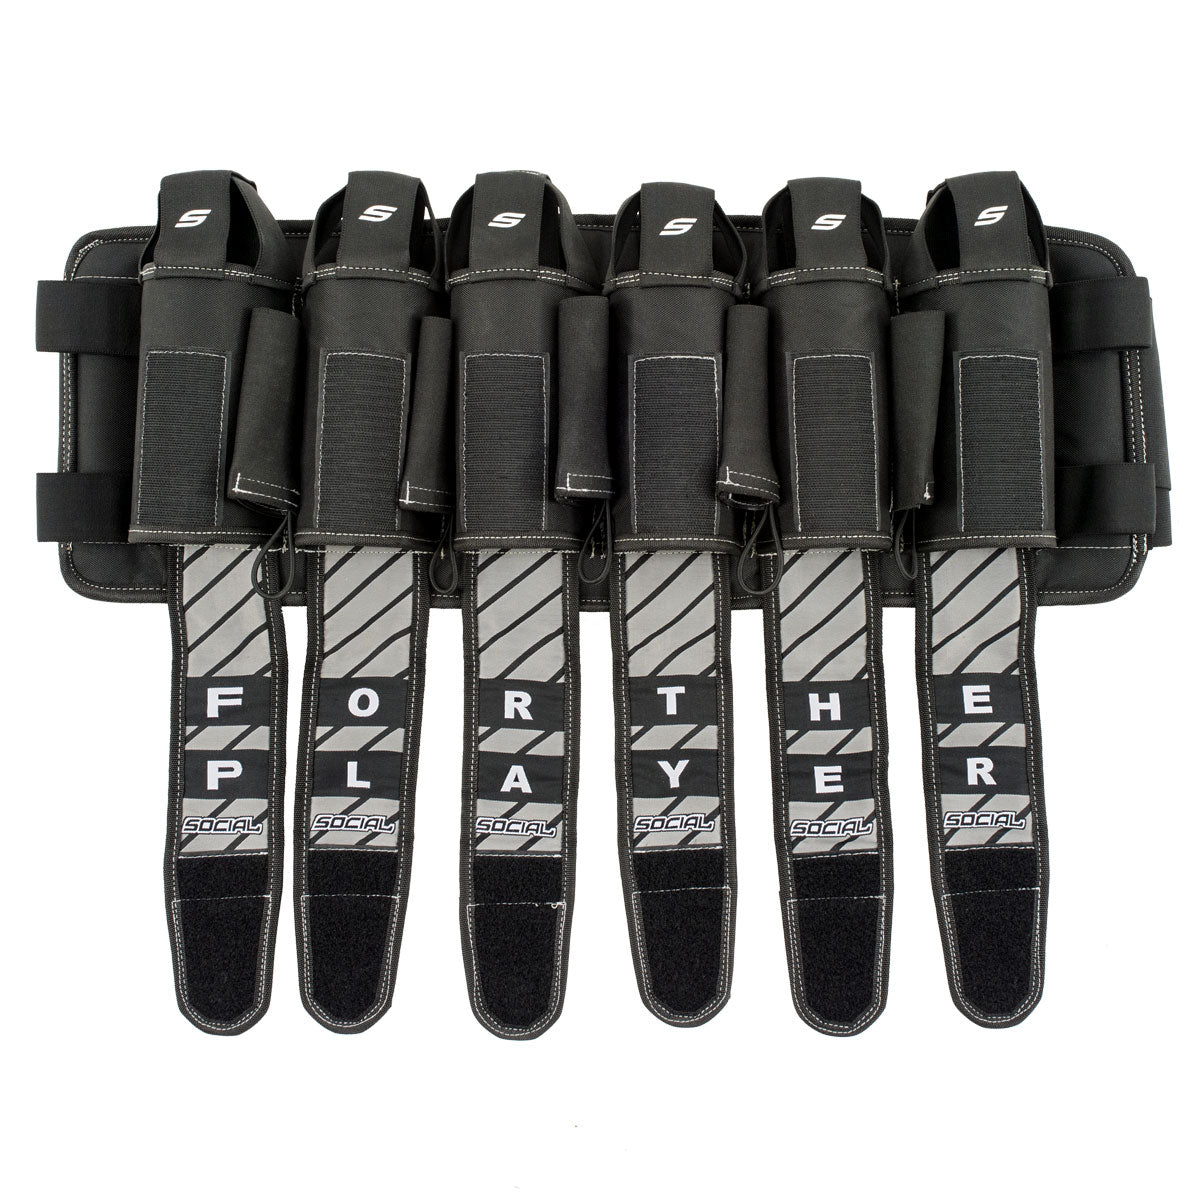 Grit Pod Pack Harness, 6+9 Stealth Black | Social Paintball Harness